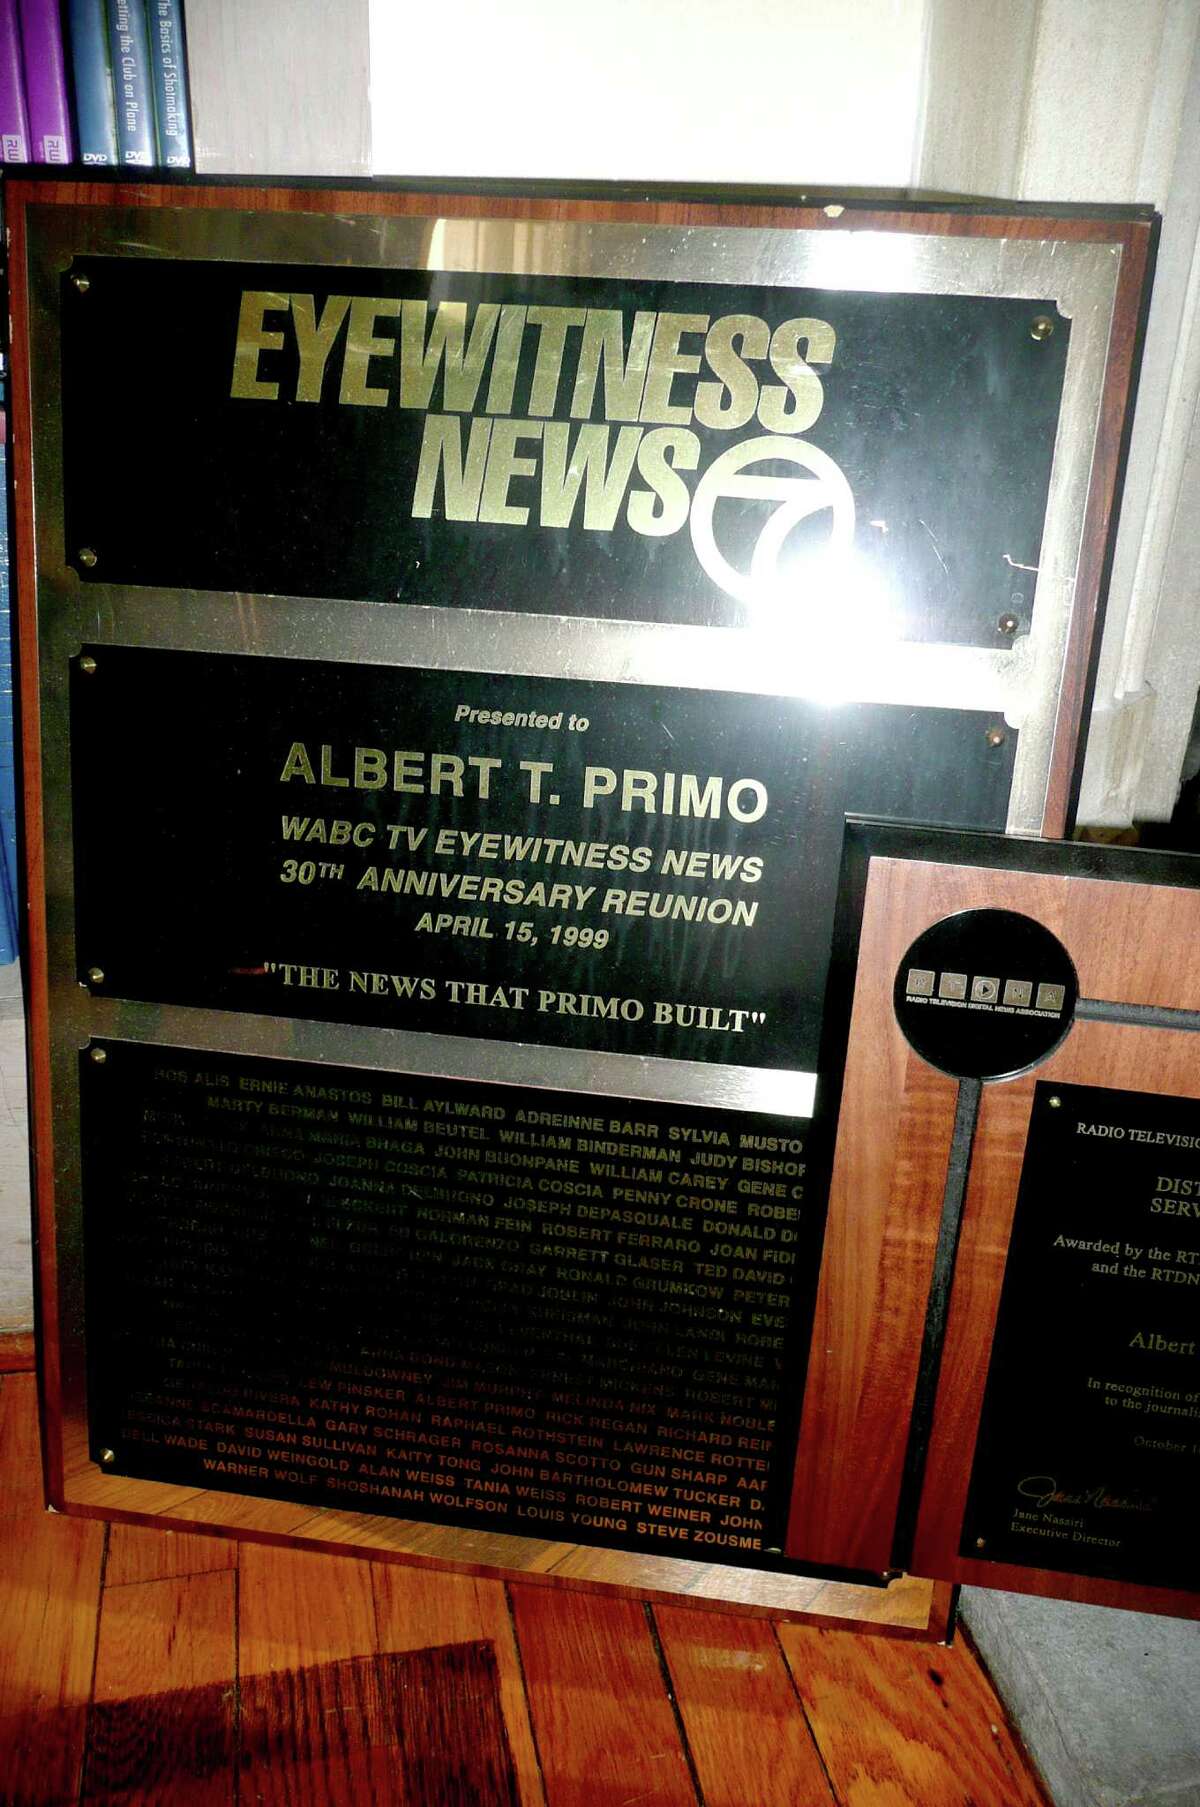 Al Primo received a plaque from the Eyewitness News team on the show's 30th anniversary. It read, in part, "The News that Promo Built."